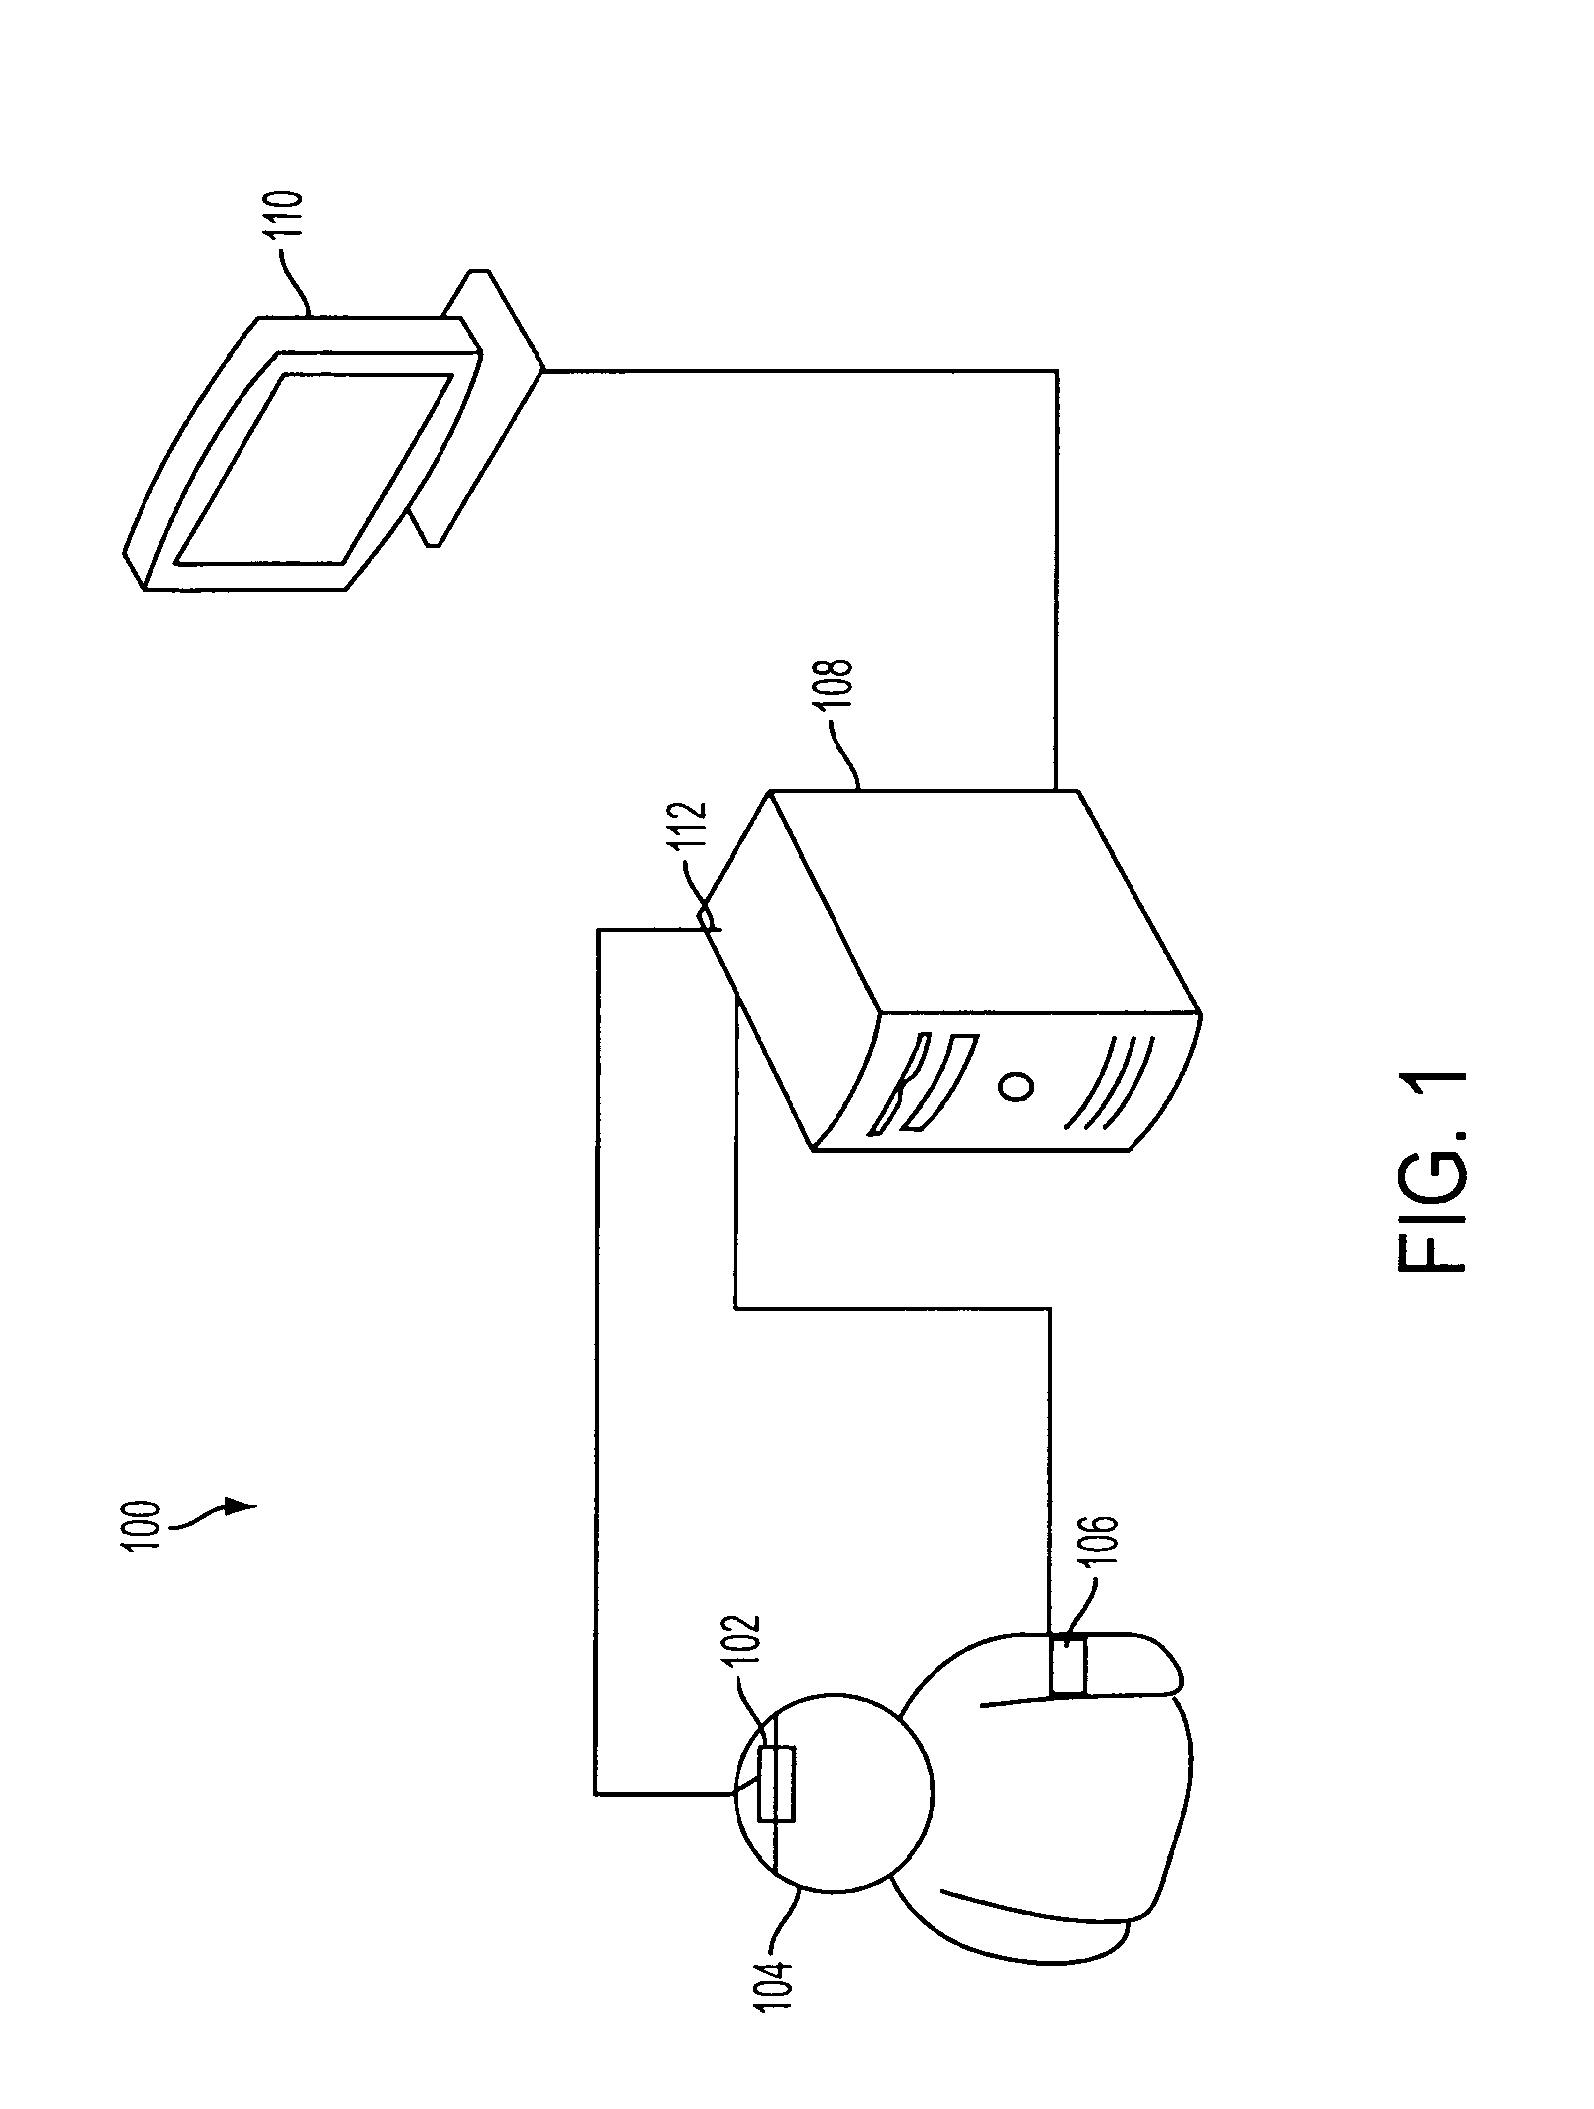 Method and system for determining a cerebrovascular autoregulation state of a patient